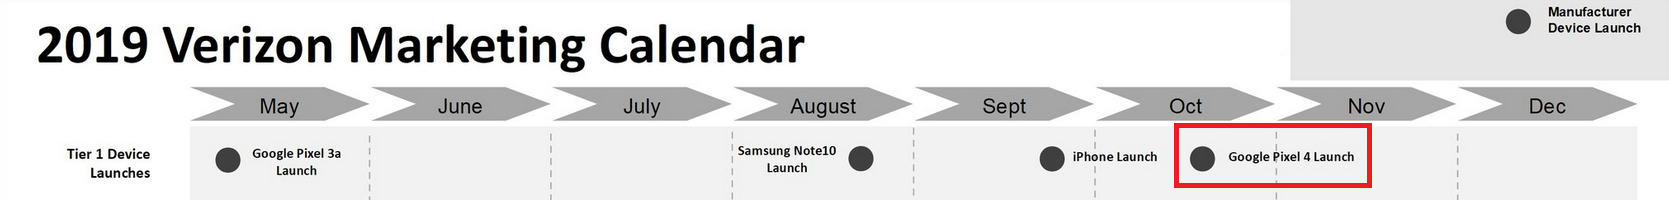 Verizon 2019 marketing calendar shows the traditional October launch for the Google Pixel 4 - Leak shoots down hope of early Pixel 4 release